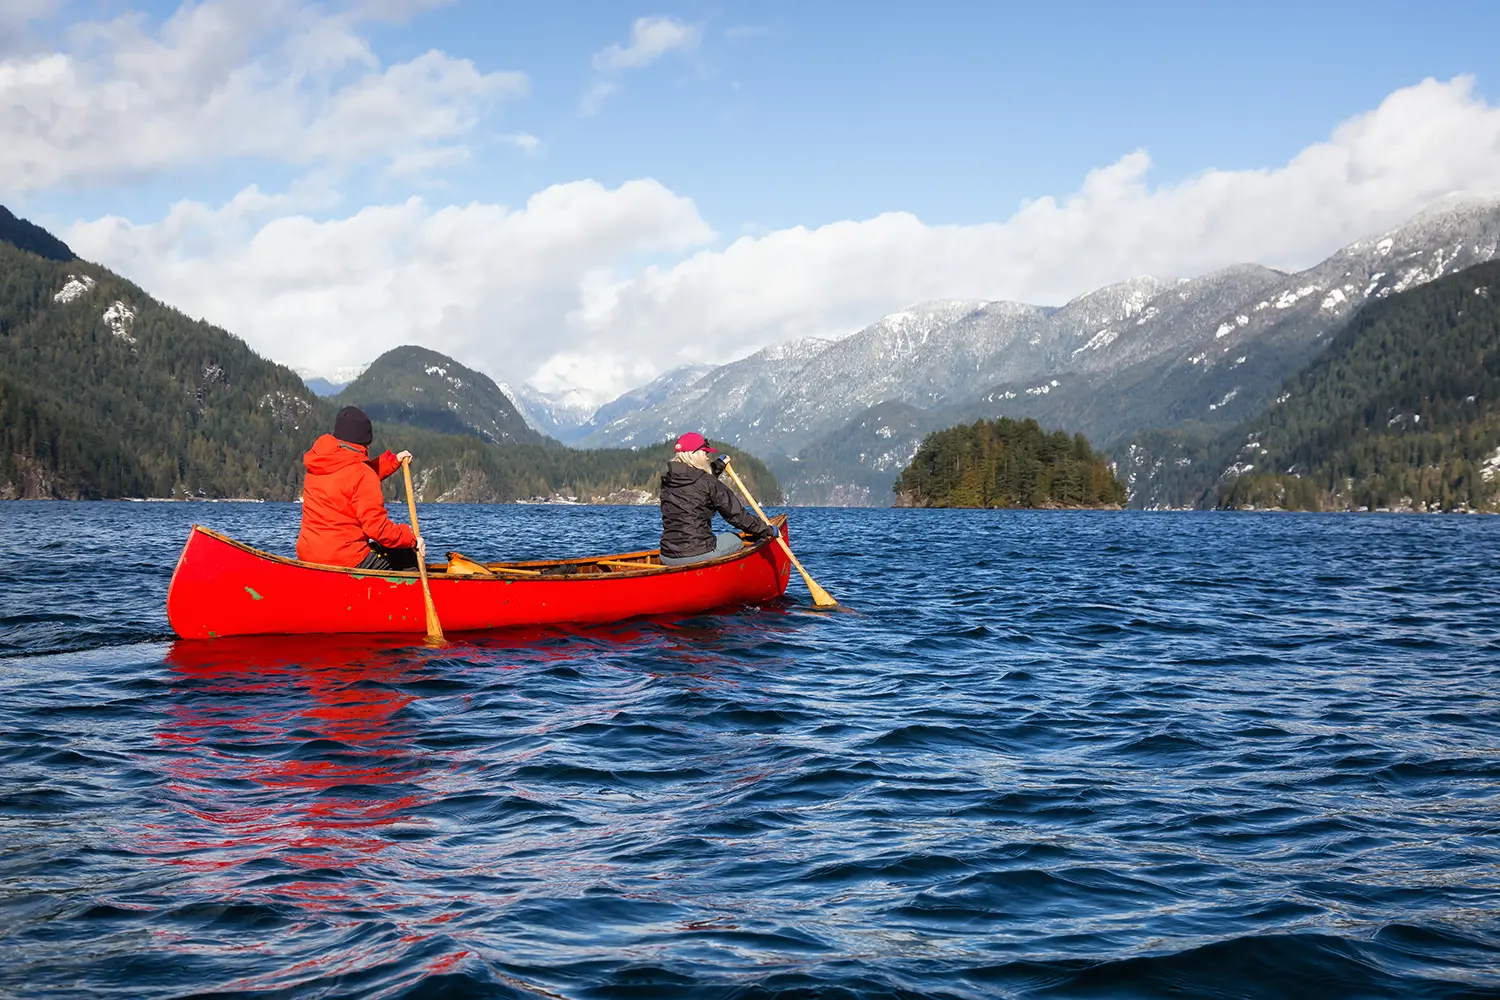 Couple friends on a wooden canoe are paddling in an inlet surrounded by Canadian mountains. Taken in Indian Arm, near Deep Cove, North Vancouver, British Columbia, Canada.